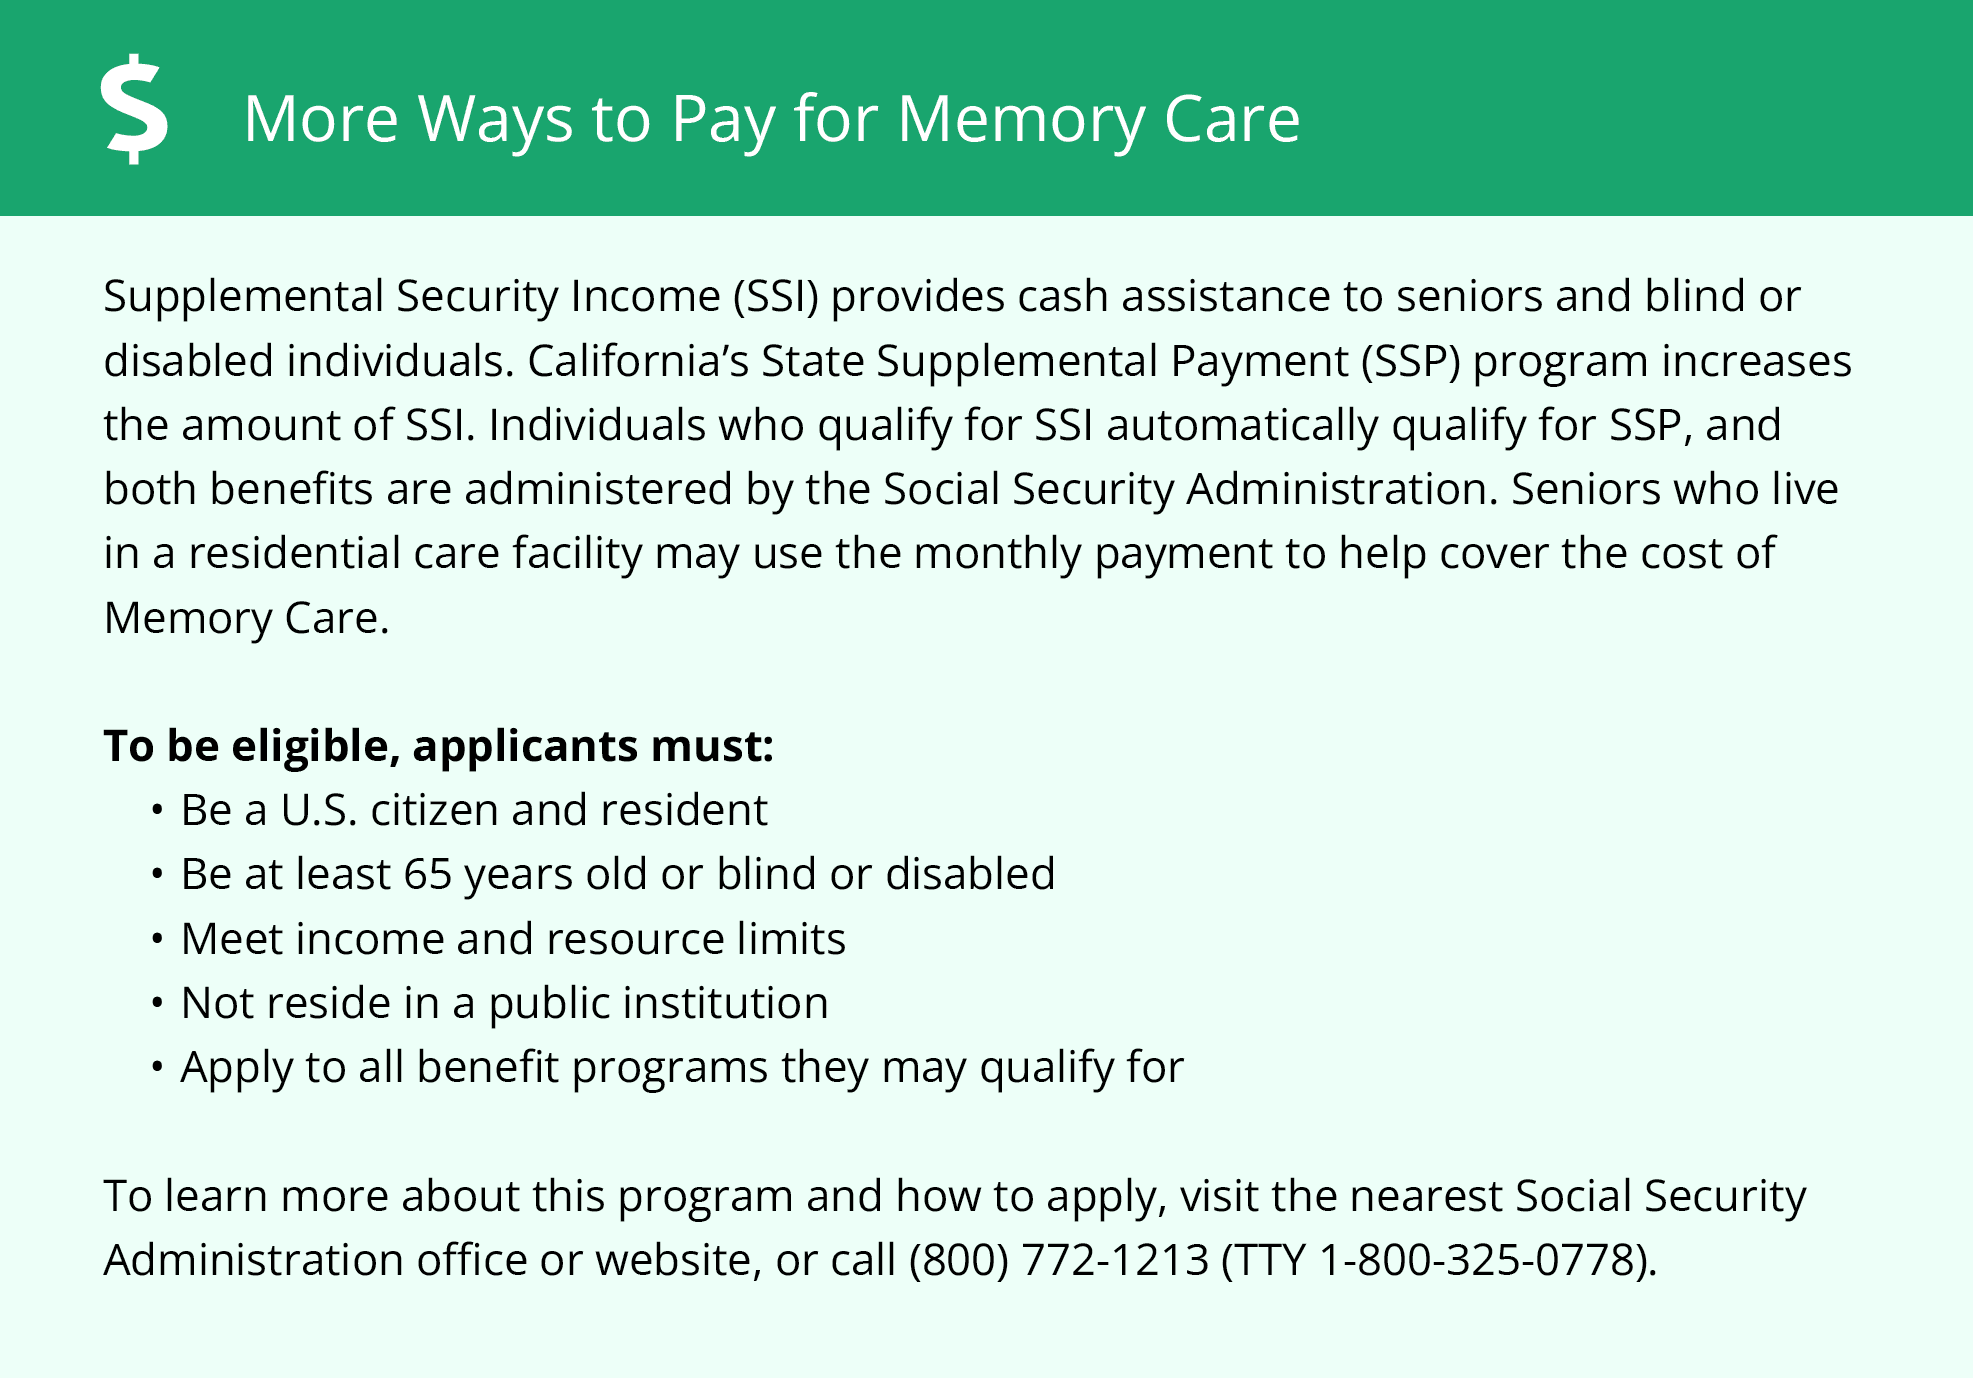 Financial Assistance for Memory Care in California